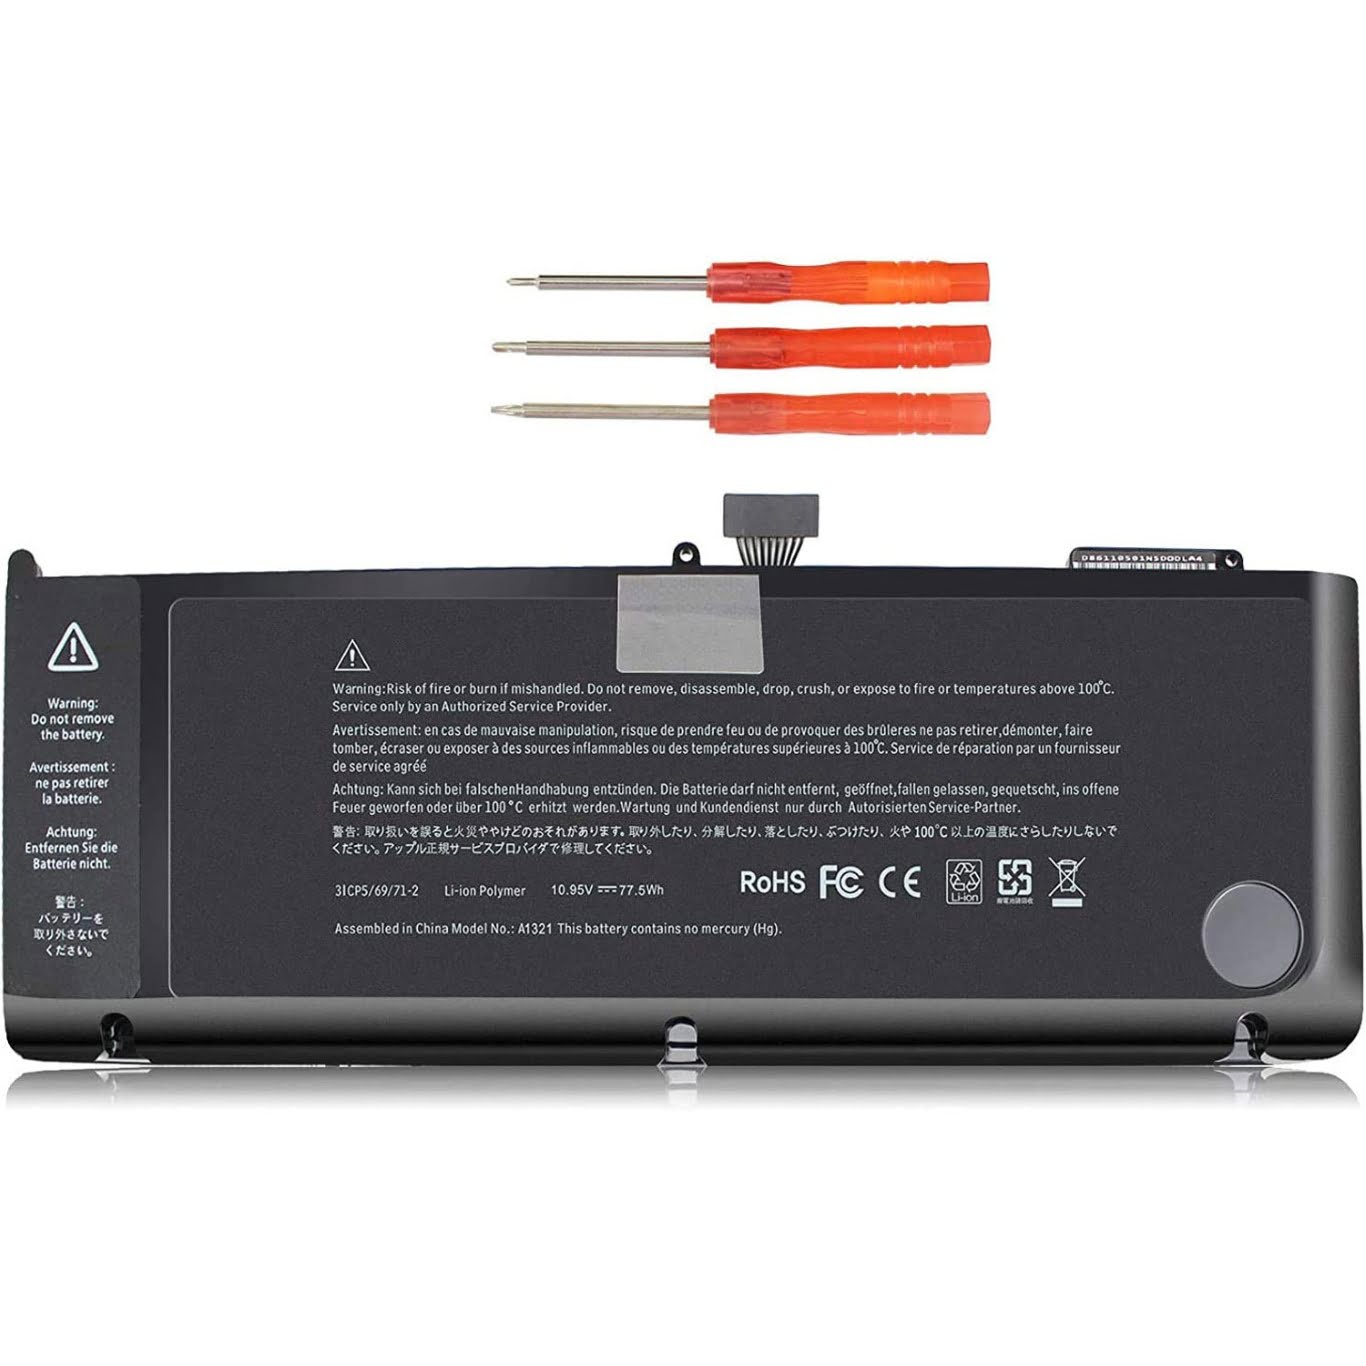 661-5211, 661-5476 replacement Laptop Battery for Apple MacBook Pro 15  A1286 (2009 Version), MacBook Pro 15  MB985*/A, 6 cells, 10.95V, 73wh